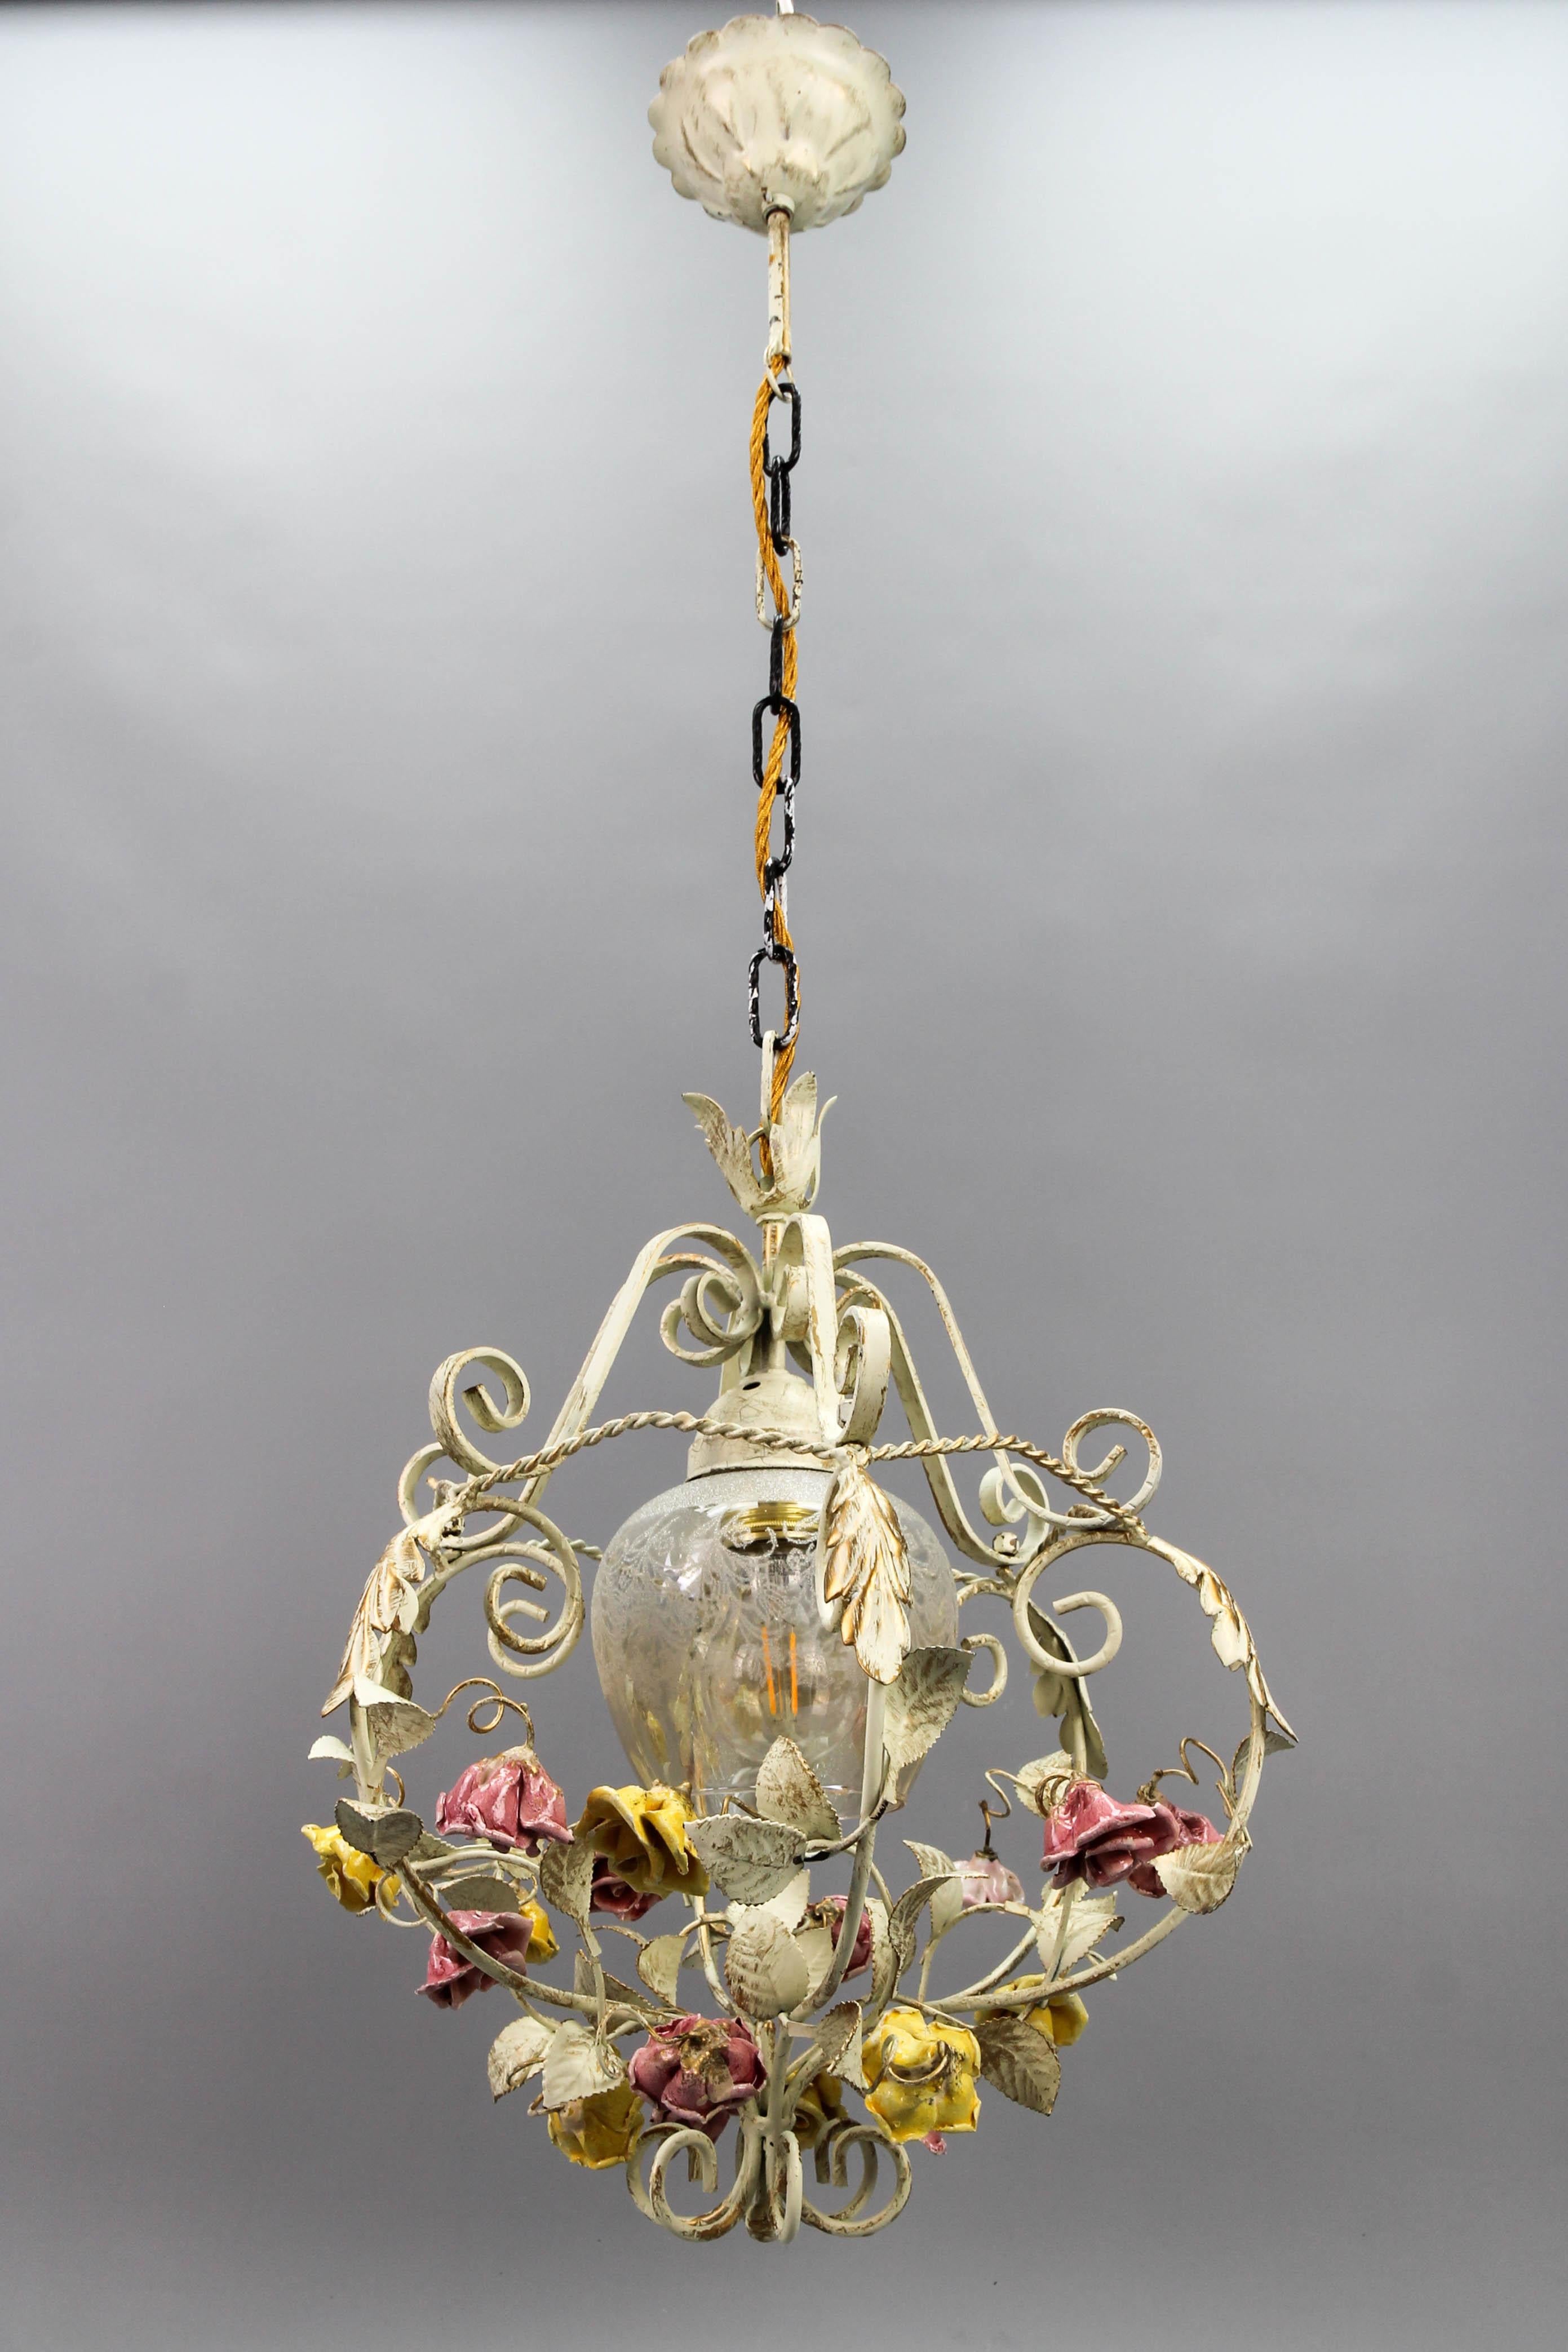 Hollywood Regency style metal and glass chandelier, from circa the 1970s, Germany.
A beautiful metal single-light chandelier from the circa 1970s. The light fixture painted in pastel tones with golden accents is adorned with leaves and beautifully